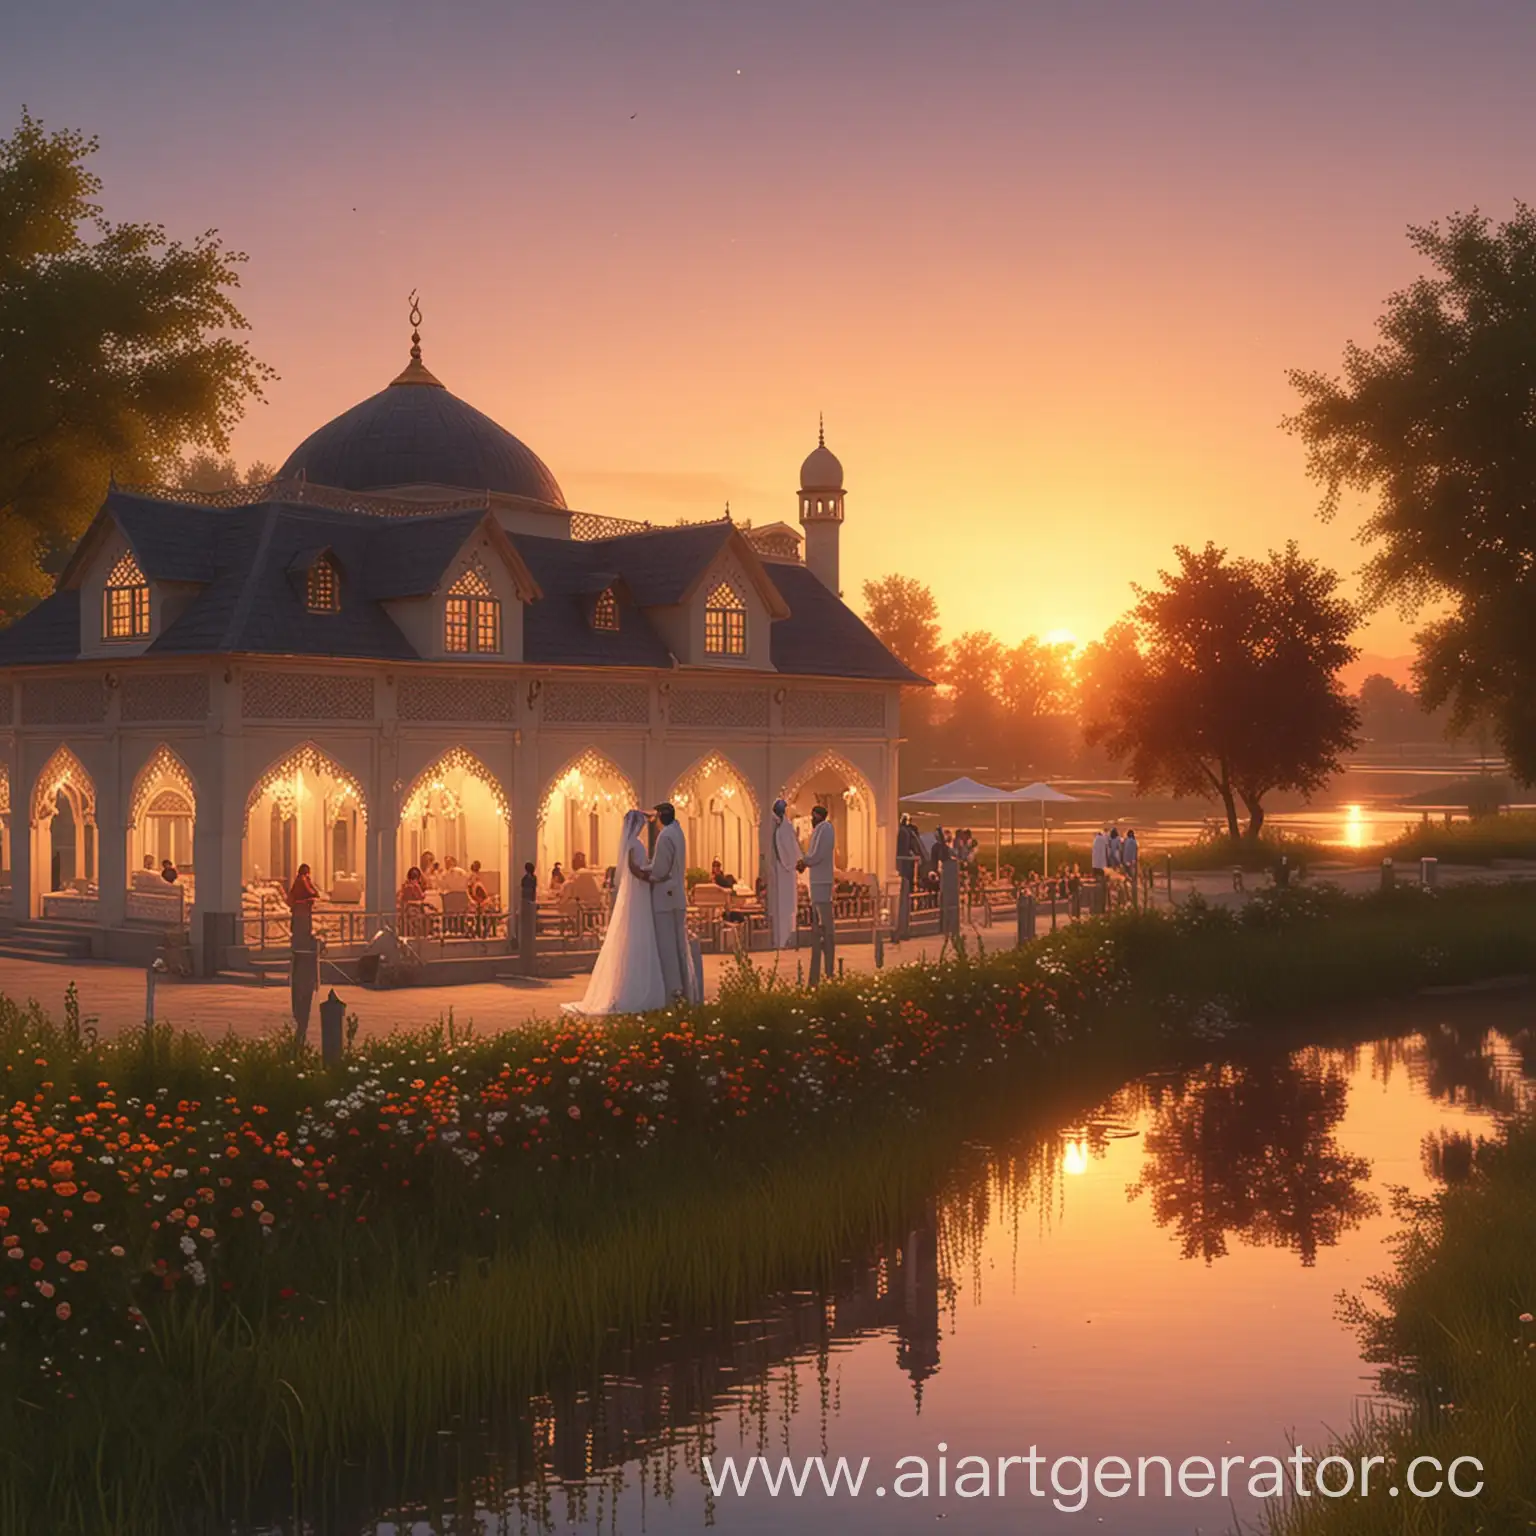 Muslim-Wedding-by-the-River-Bank-at-Sunset-near-Countryside-House